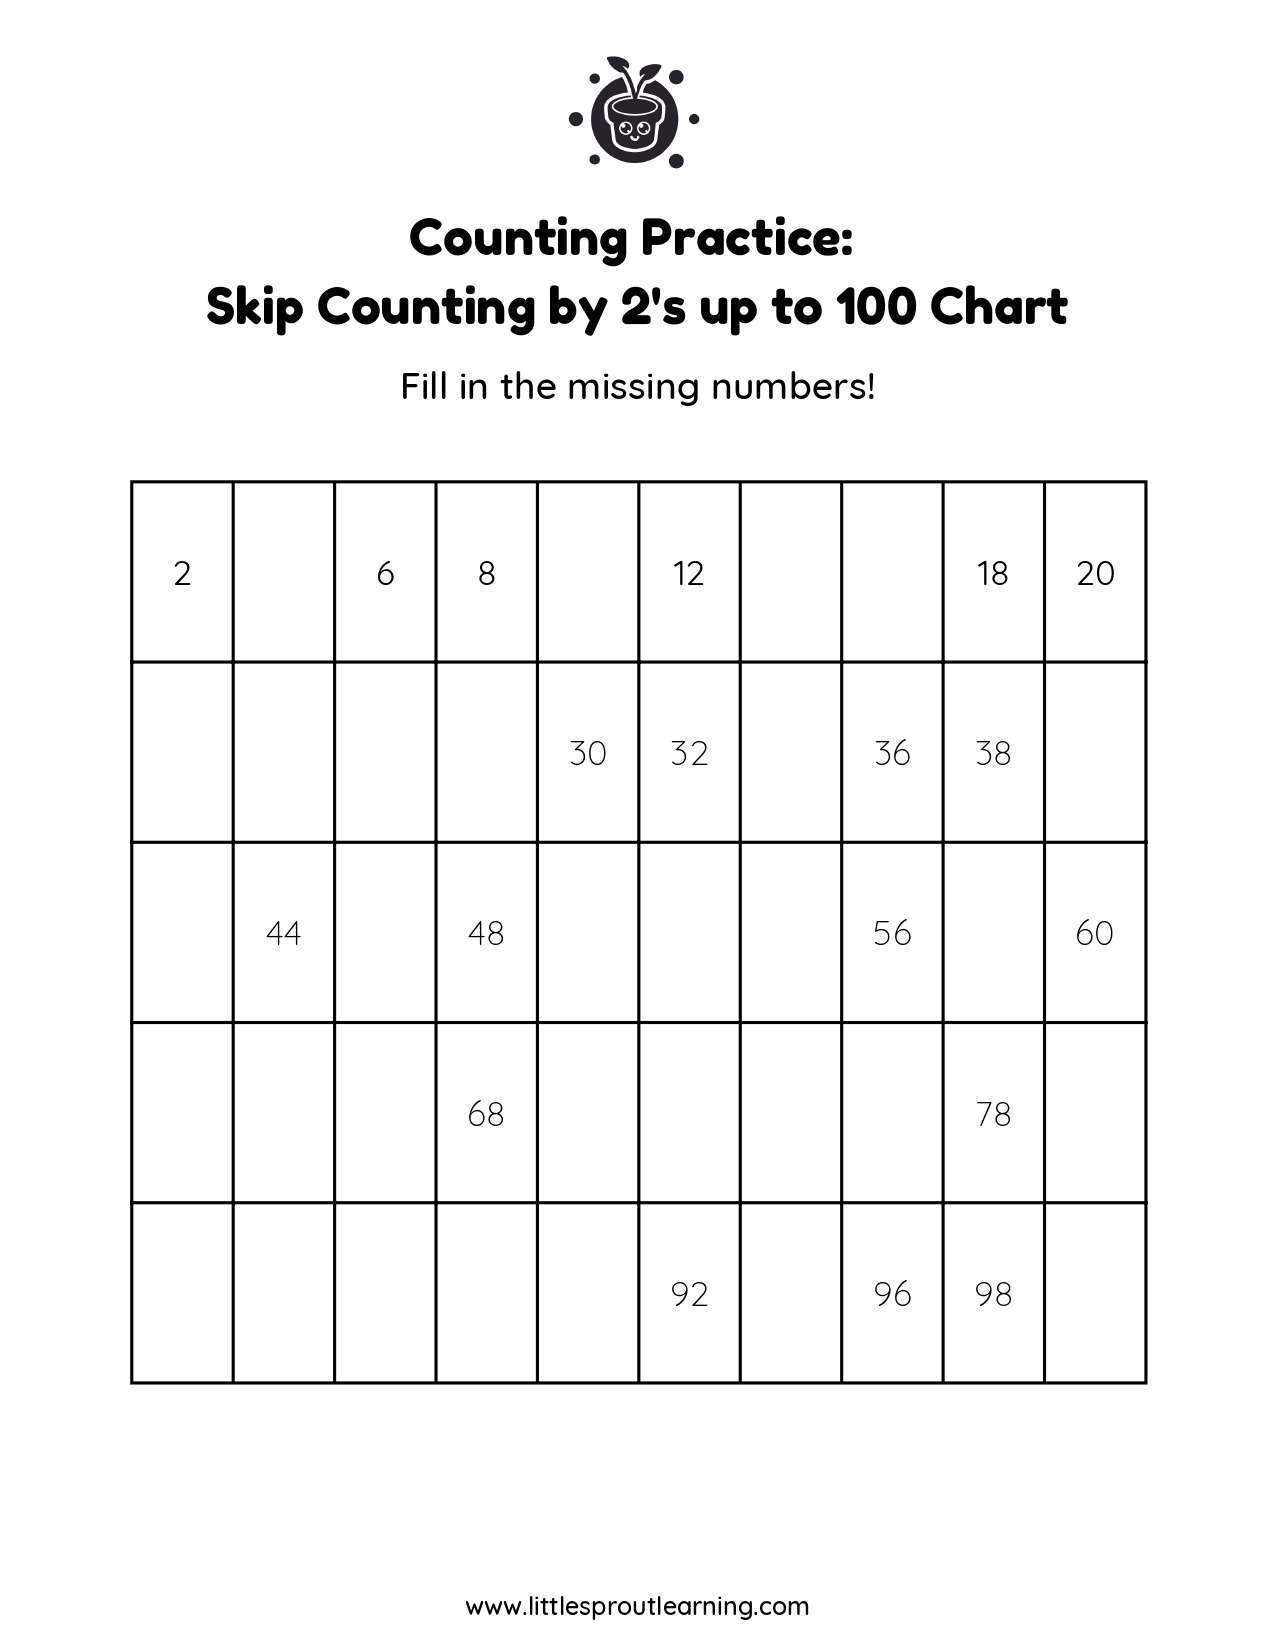 Skip Counting by 2 up to 100 Fill in the Blanks